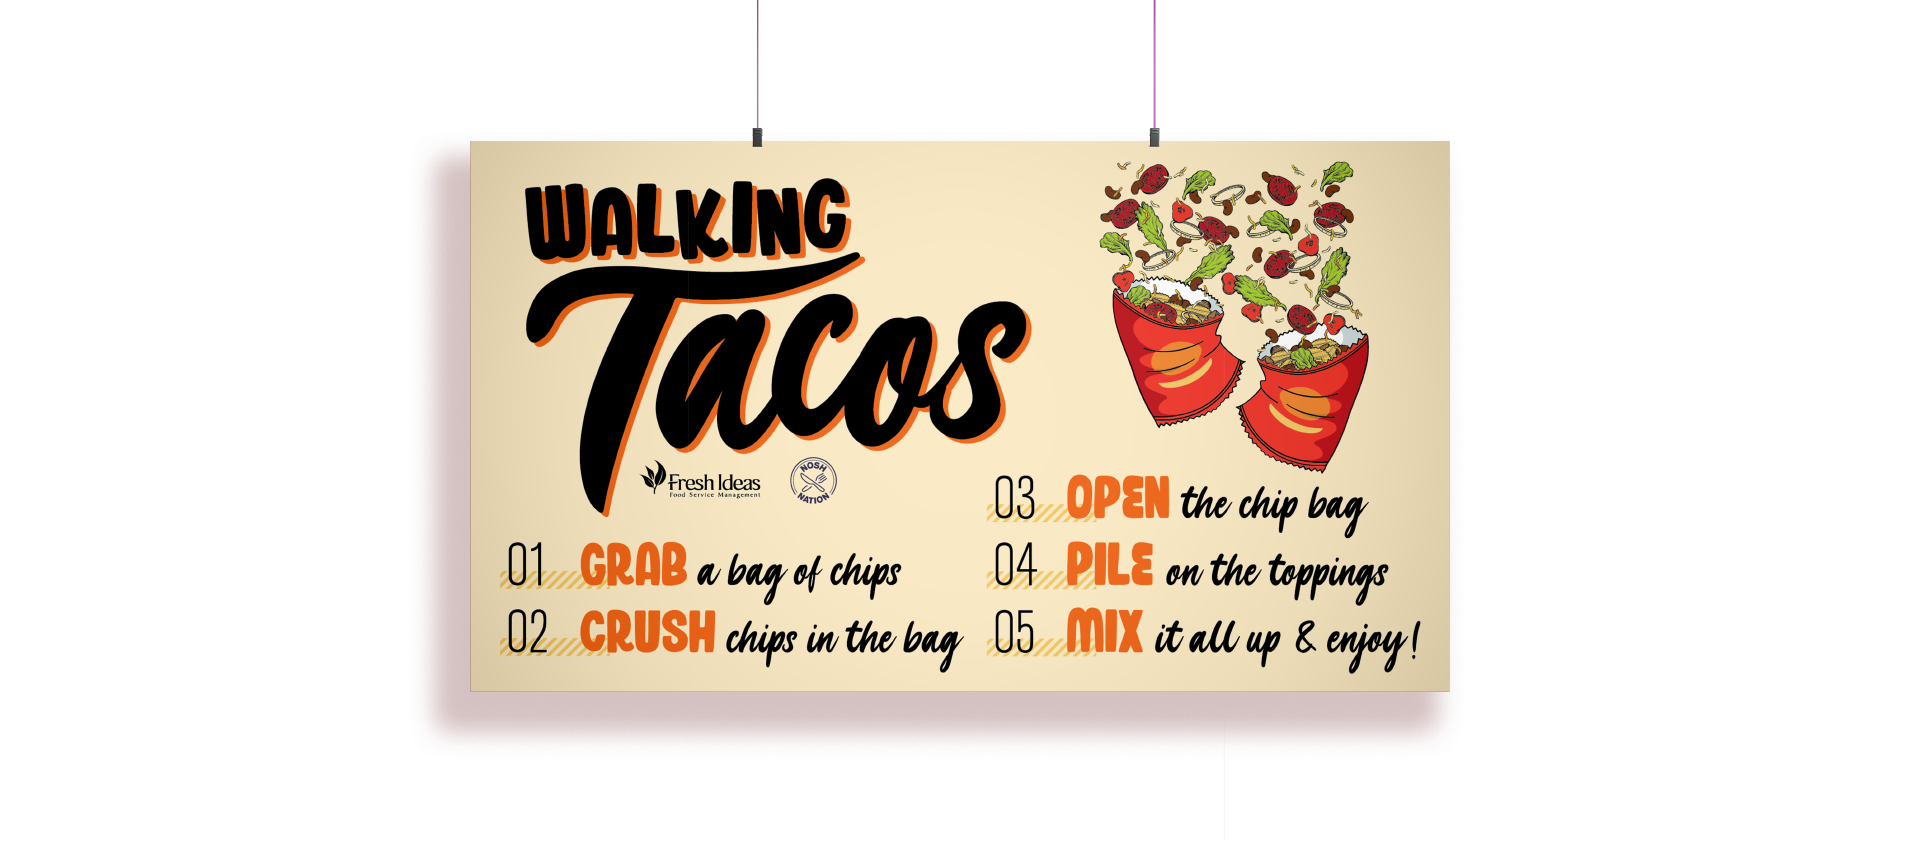 Horizontal poster advertising a walking tacos event